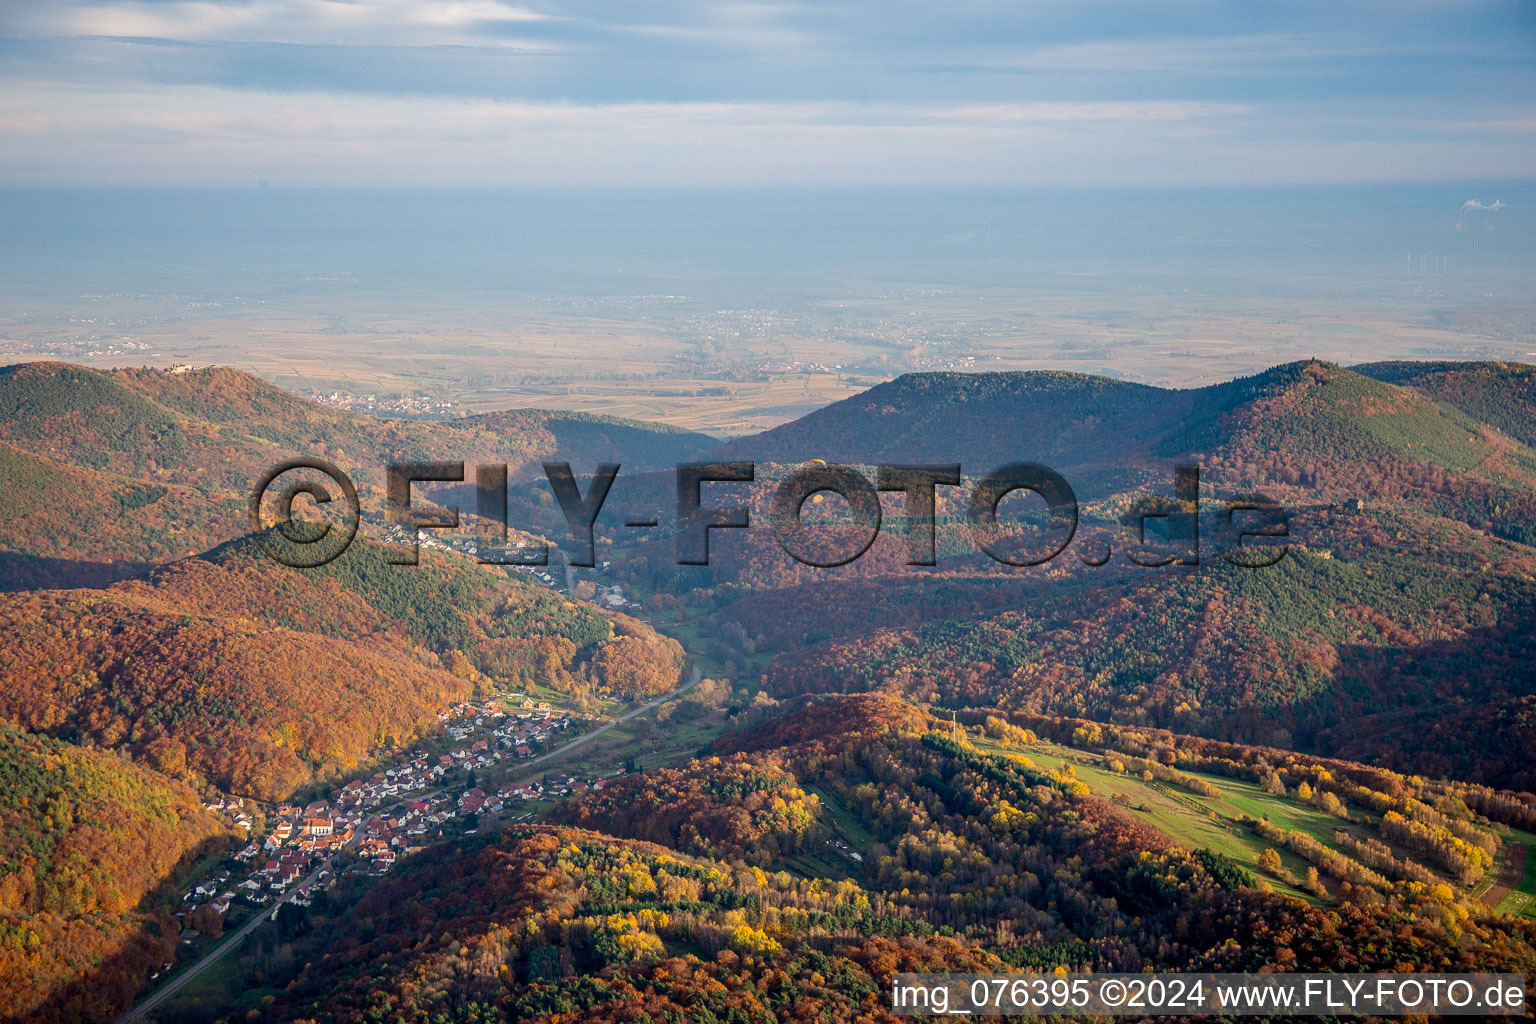 Forest and mountain scenery of the Pfaelzerwald in fall in Waldrohrbach in the state Rhineland-Palatinate, Germany